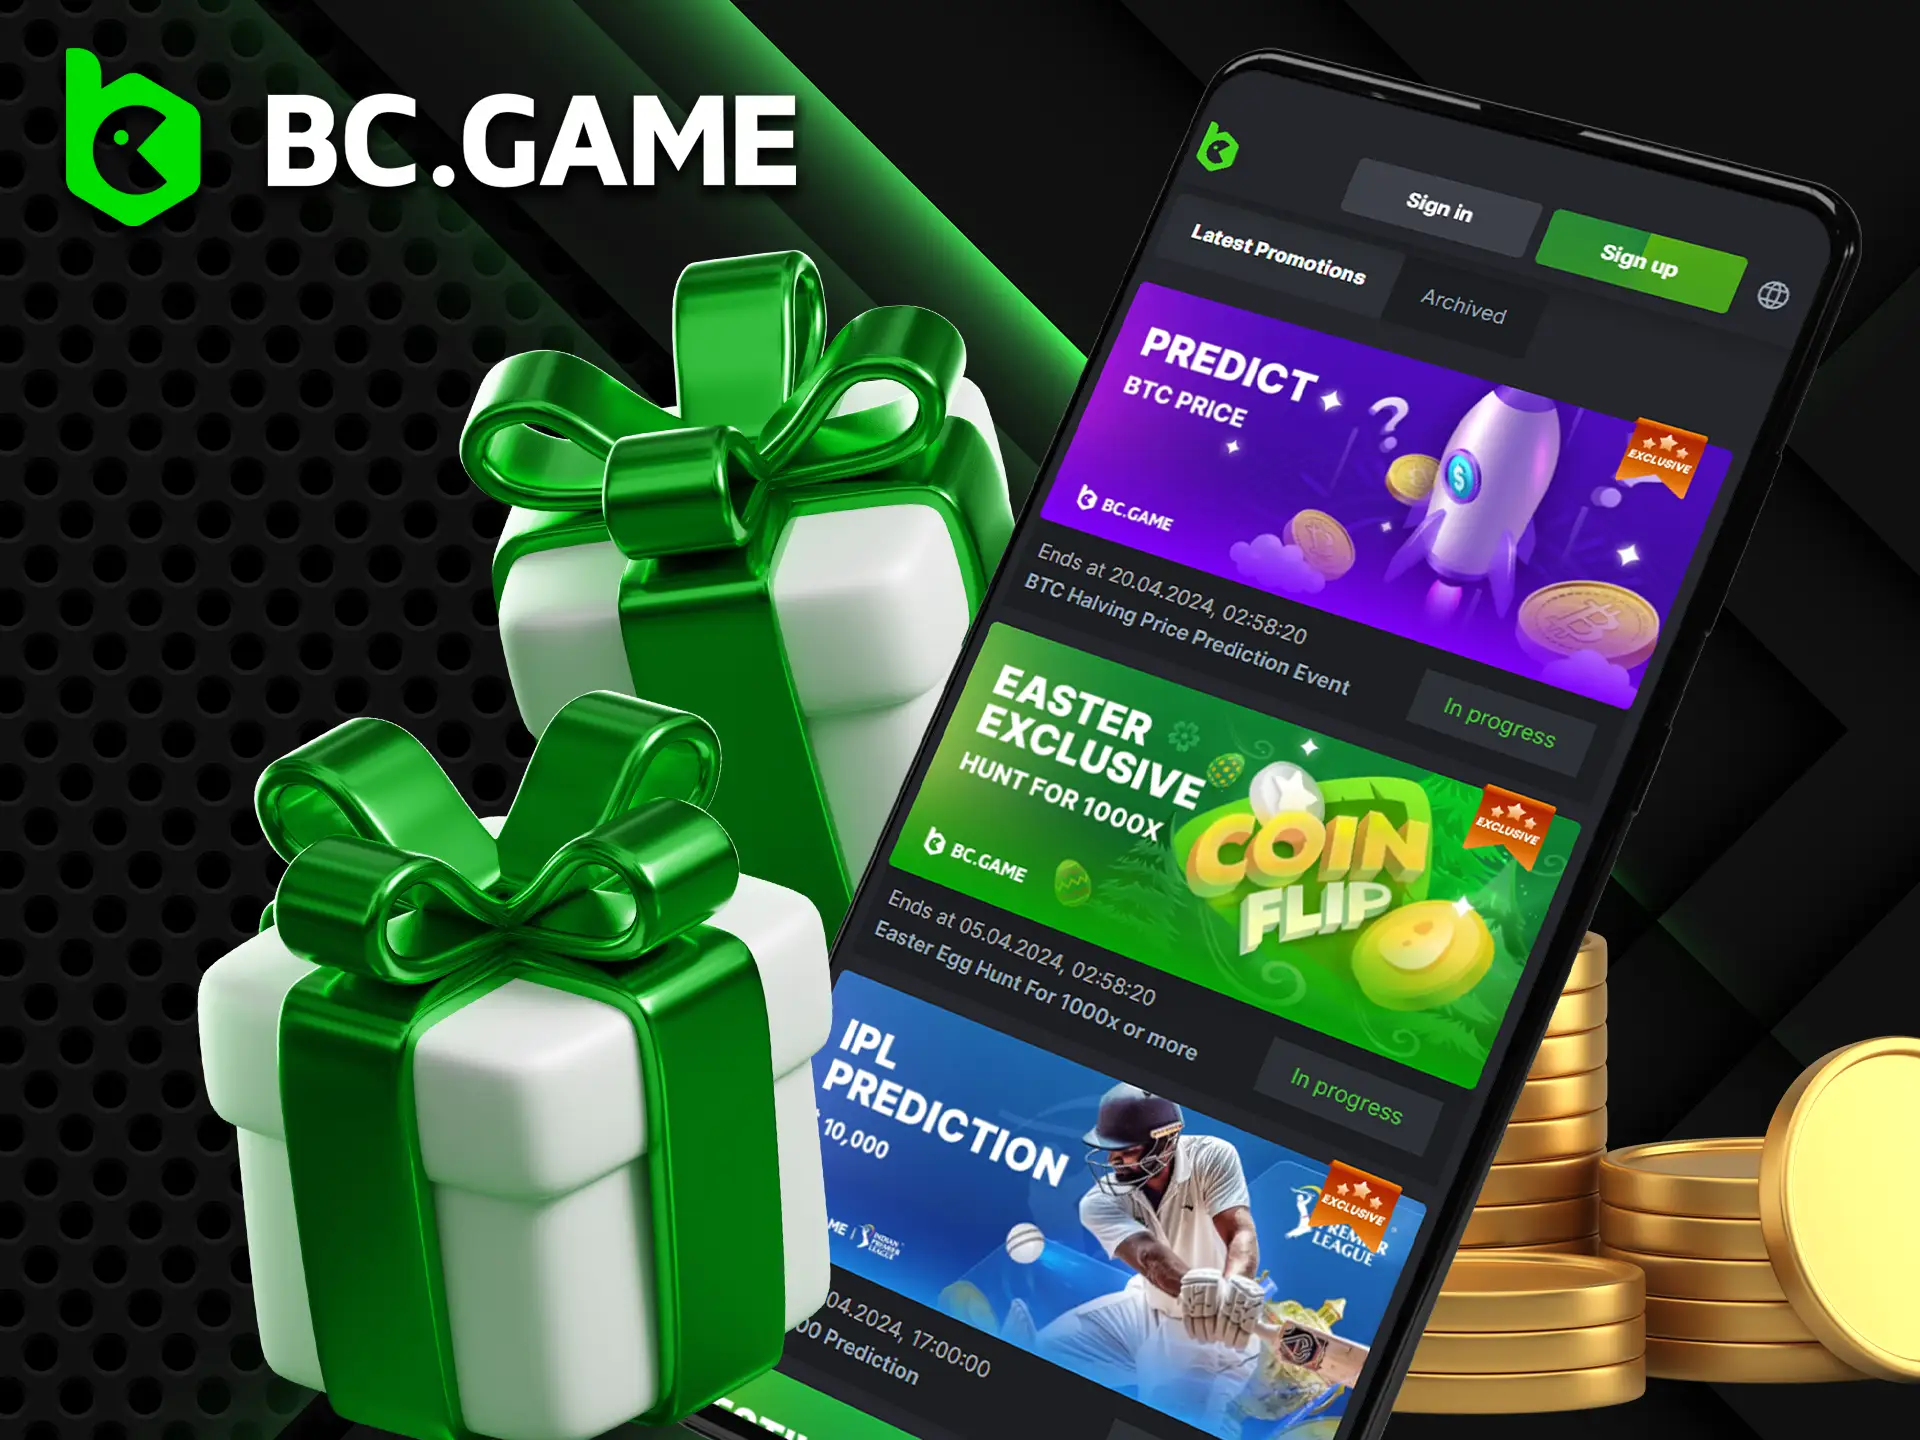 The BC GAME app has tons of bonuses and promotions for beginners and regular players.